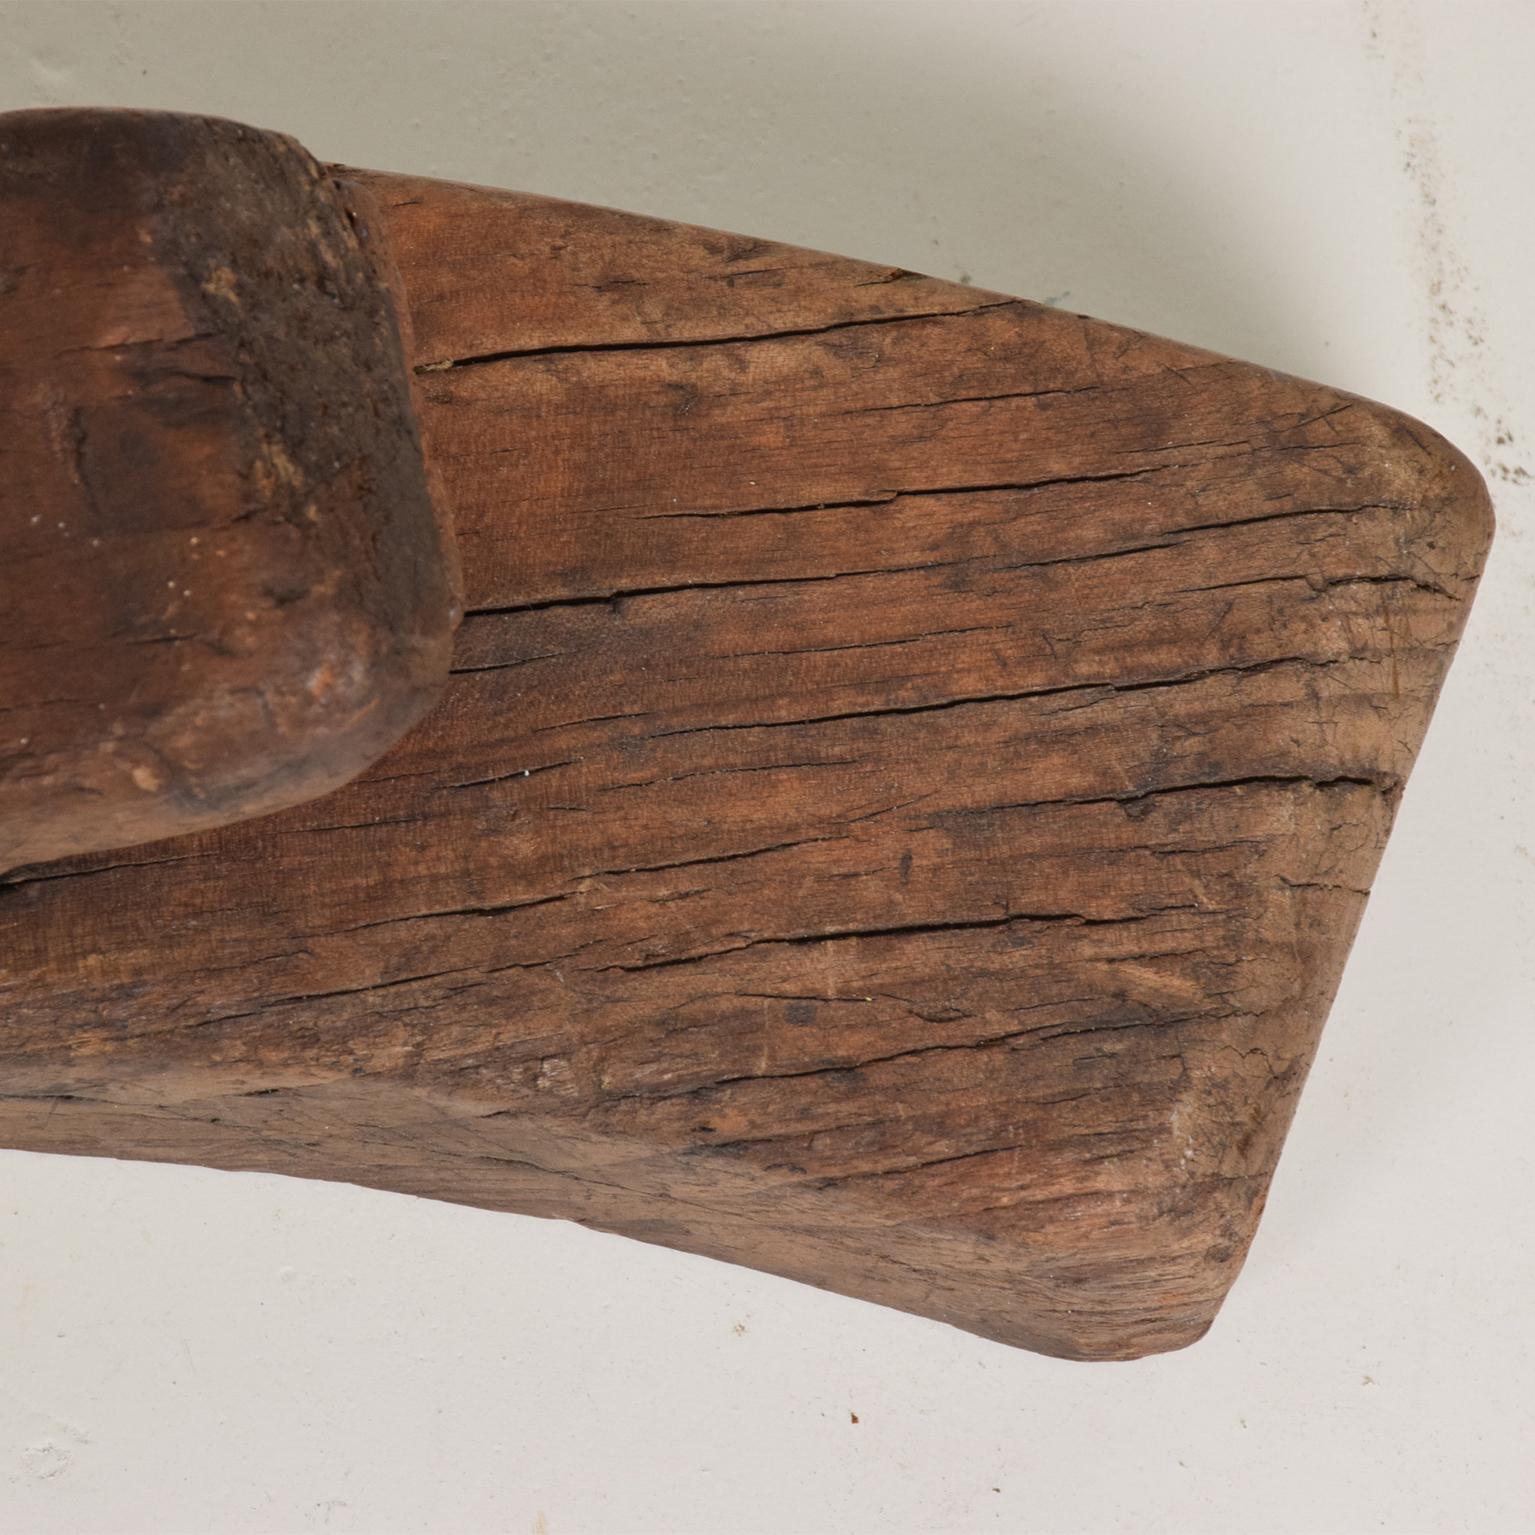 Early 20th Century Japanese Antique Collectible Curved Hand Wood Plane Carpentry Tool, 1920s